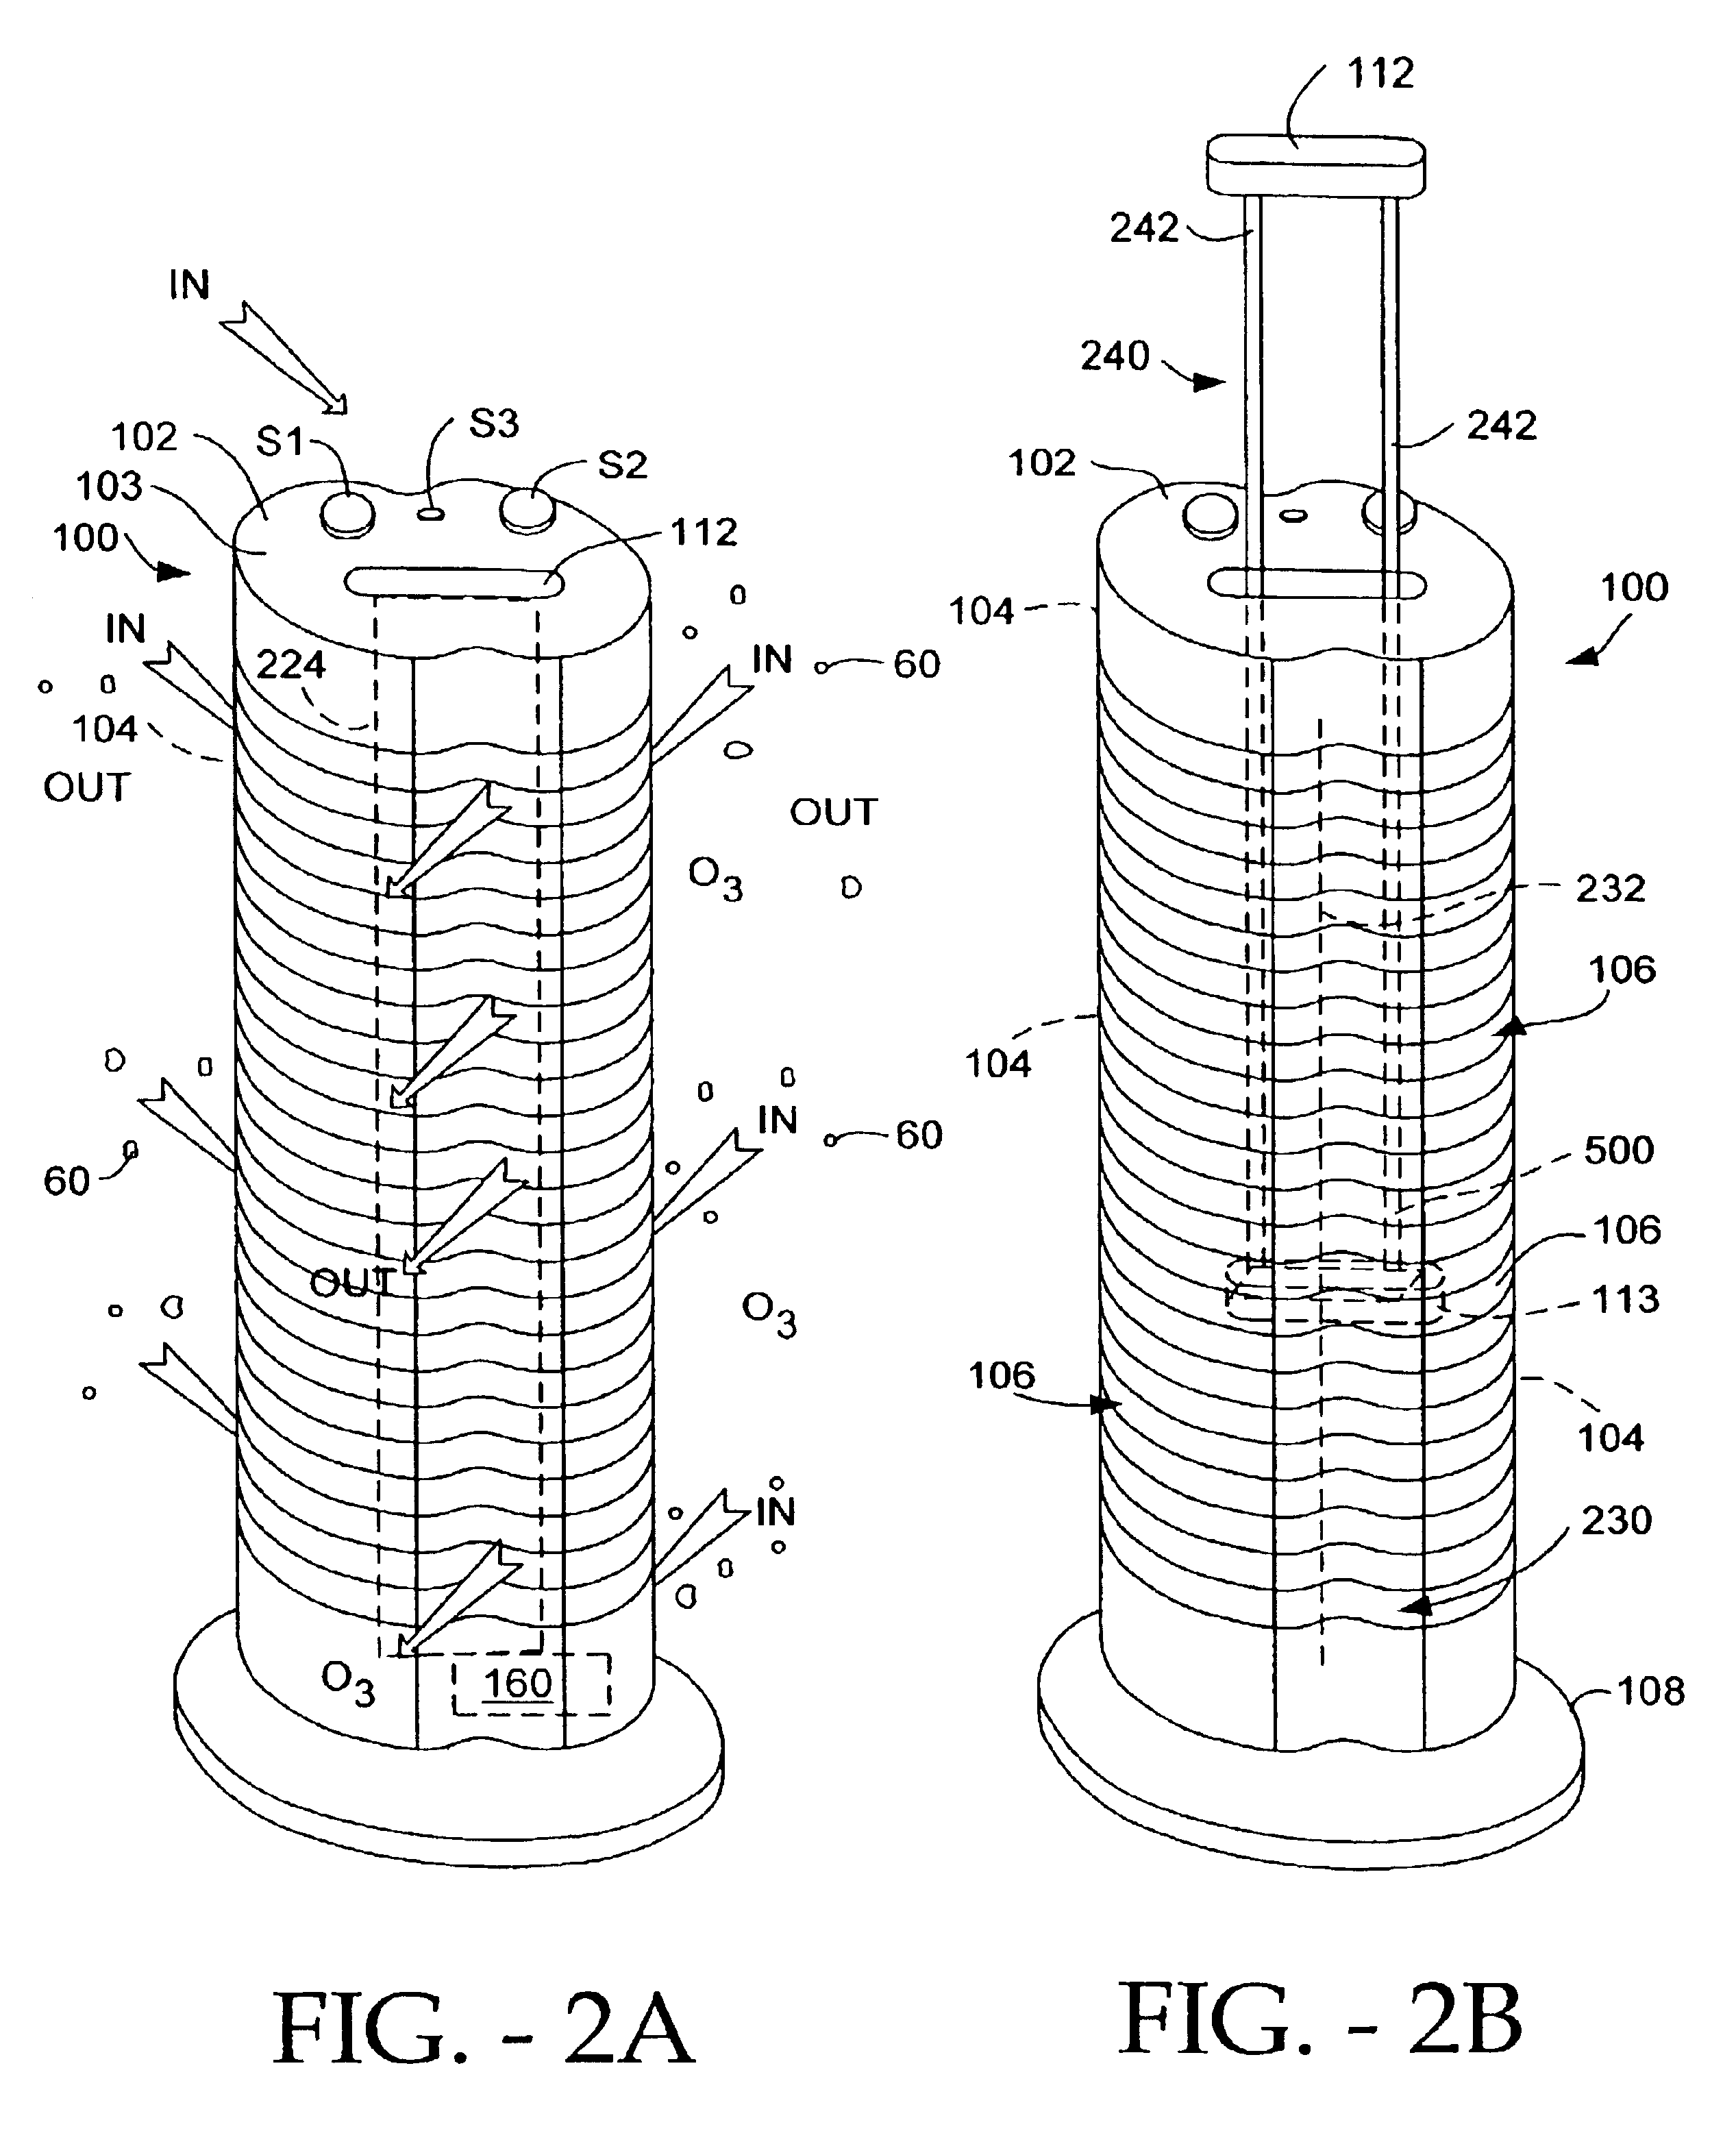 Electro-kinetic air transporter and conditioner device with enhanced housing configuration and enhanced anti-microorganism capability